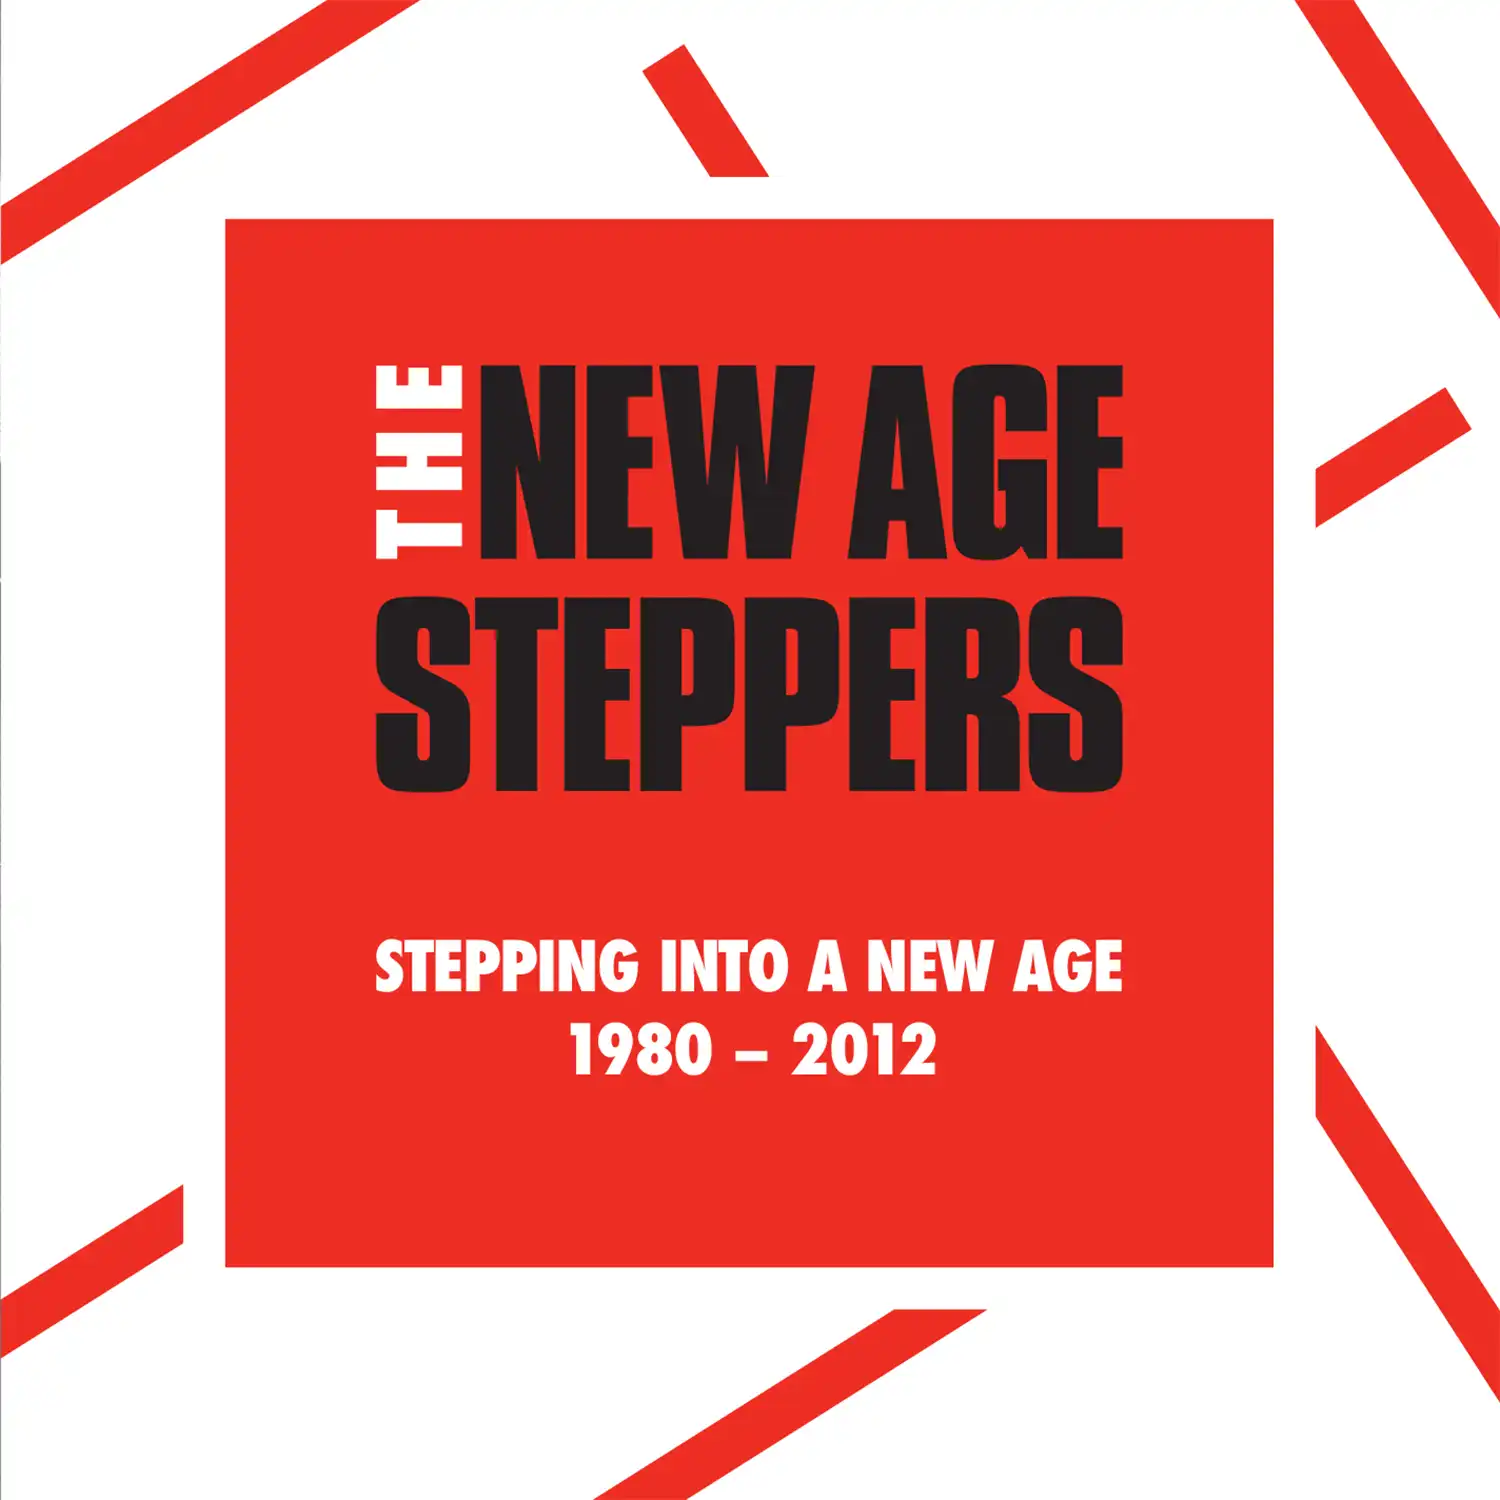 NEW AGE STEPPERS / STEPPING INTO A NEW AGE 1980 - 2012 限定 国内仕様5CD(BOX)+Tシャツ(M)  